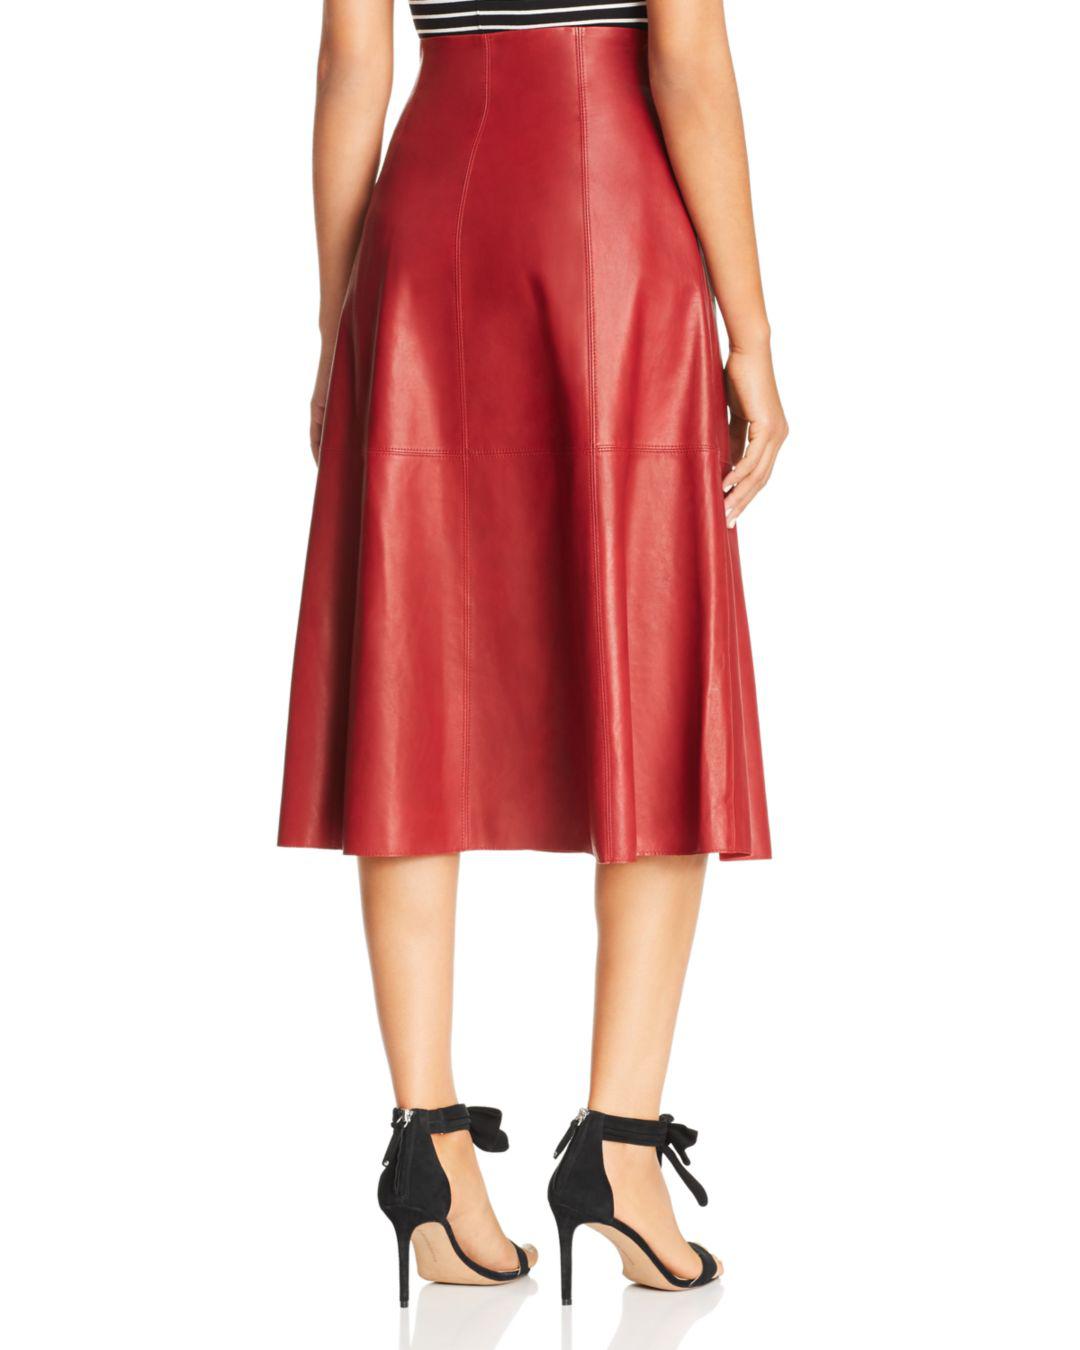 Kate Spade Leather Midi Skirt in Red - Lyst